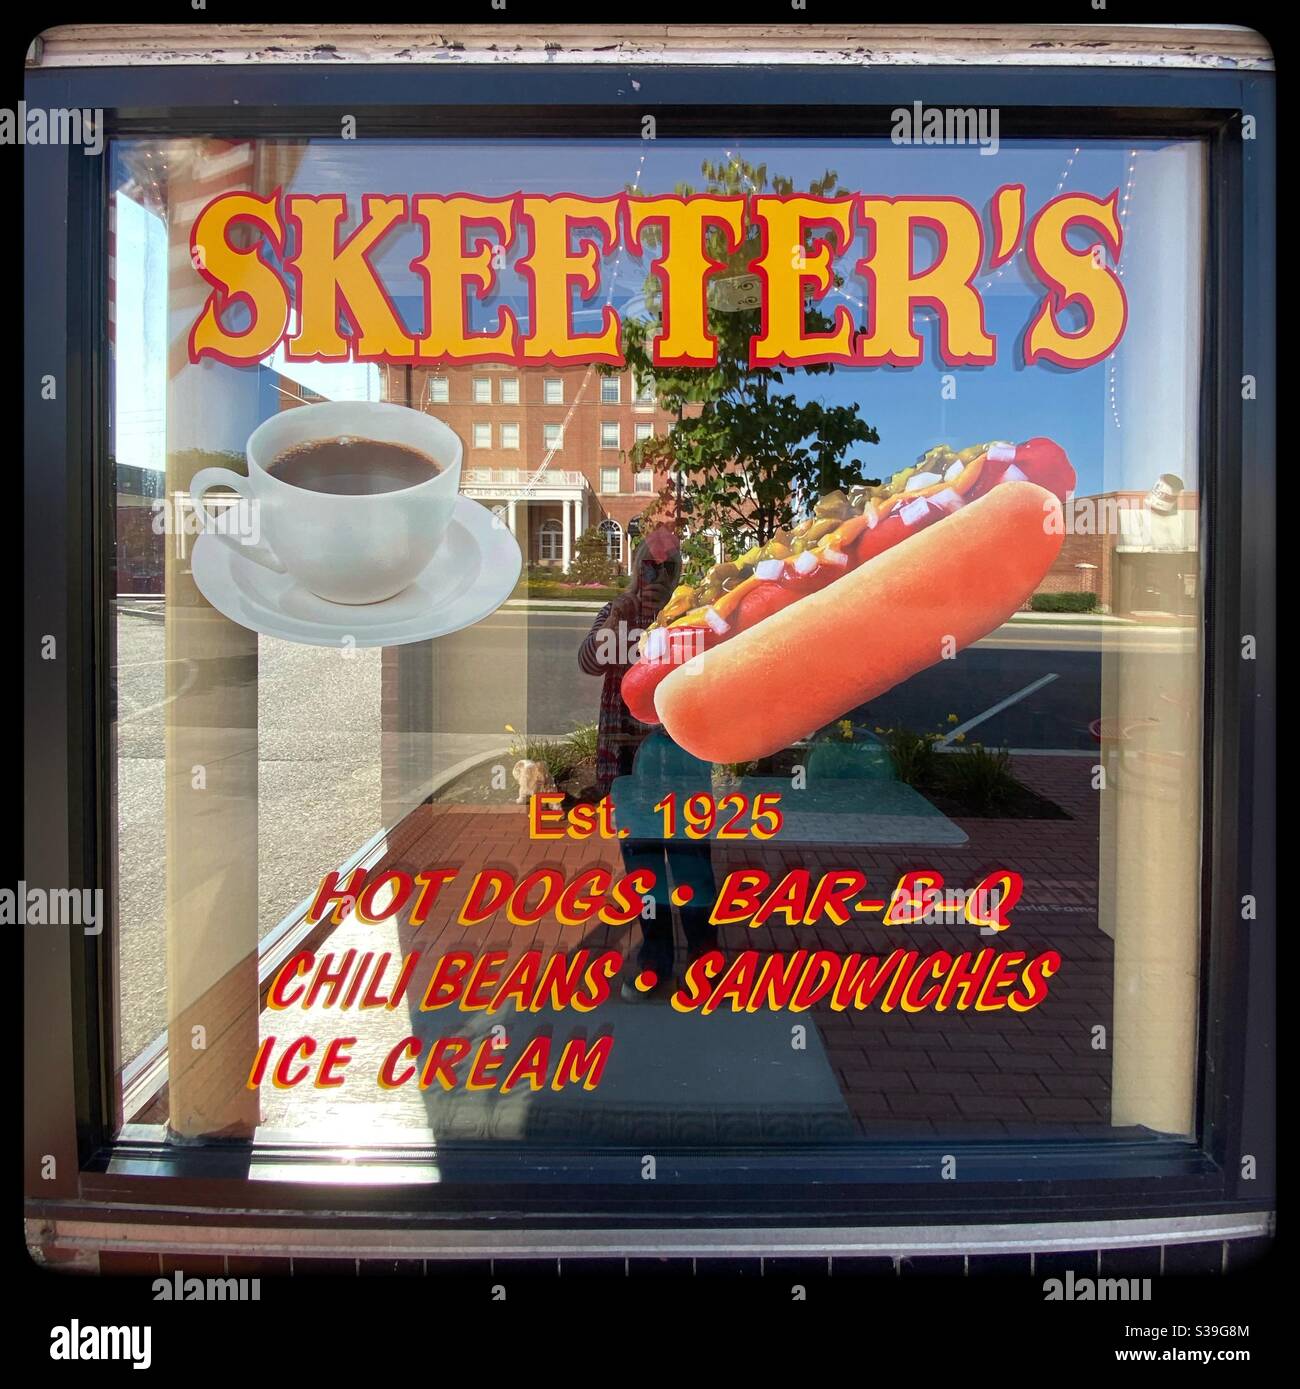 Skeeters famous hot dog sign in Wytheville Virginia Stock Photo